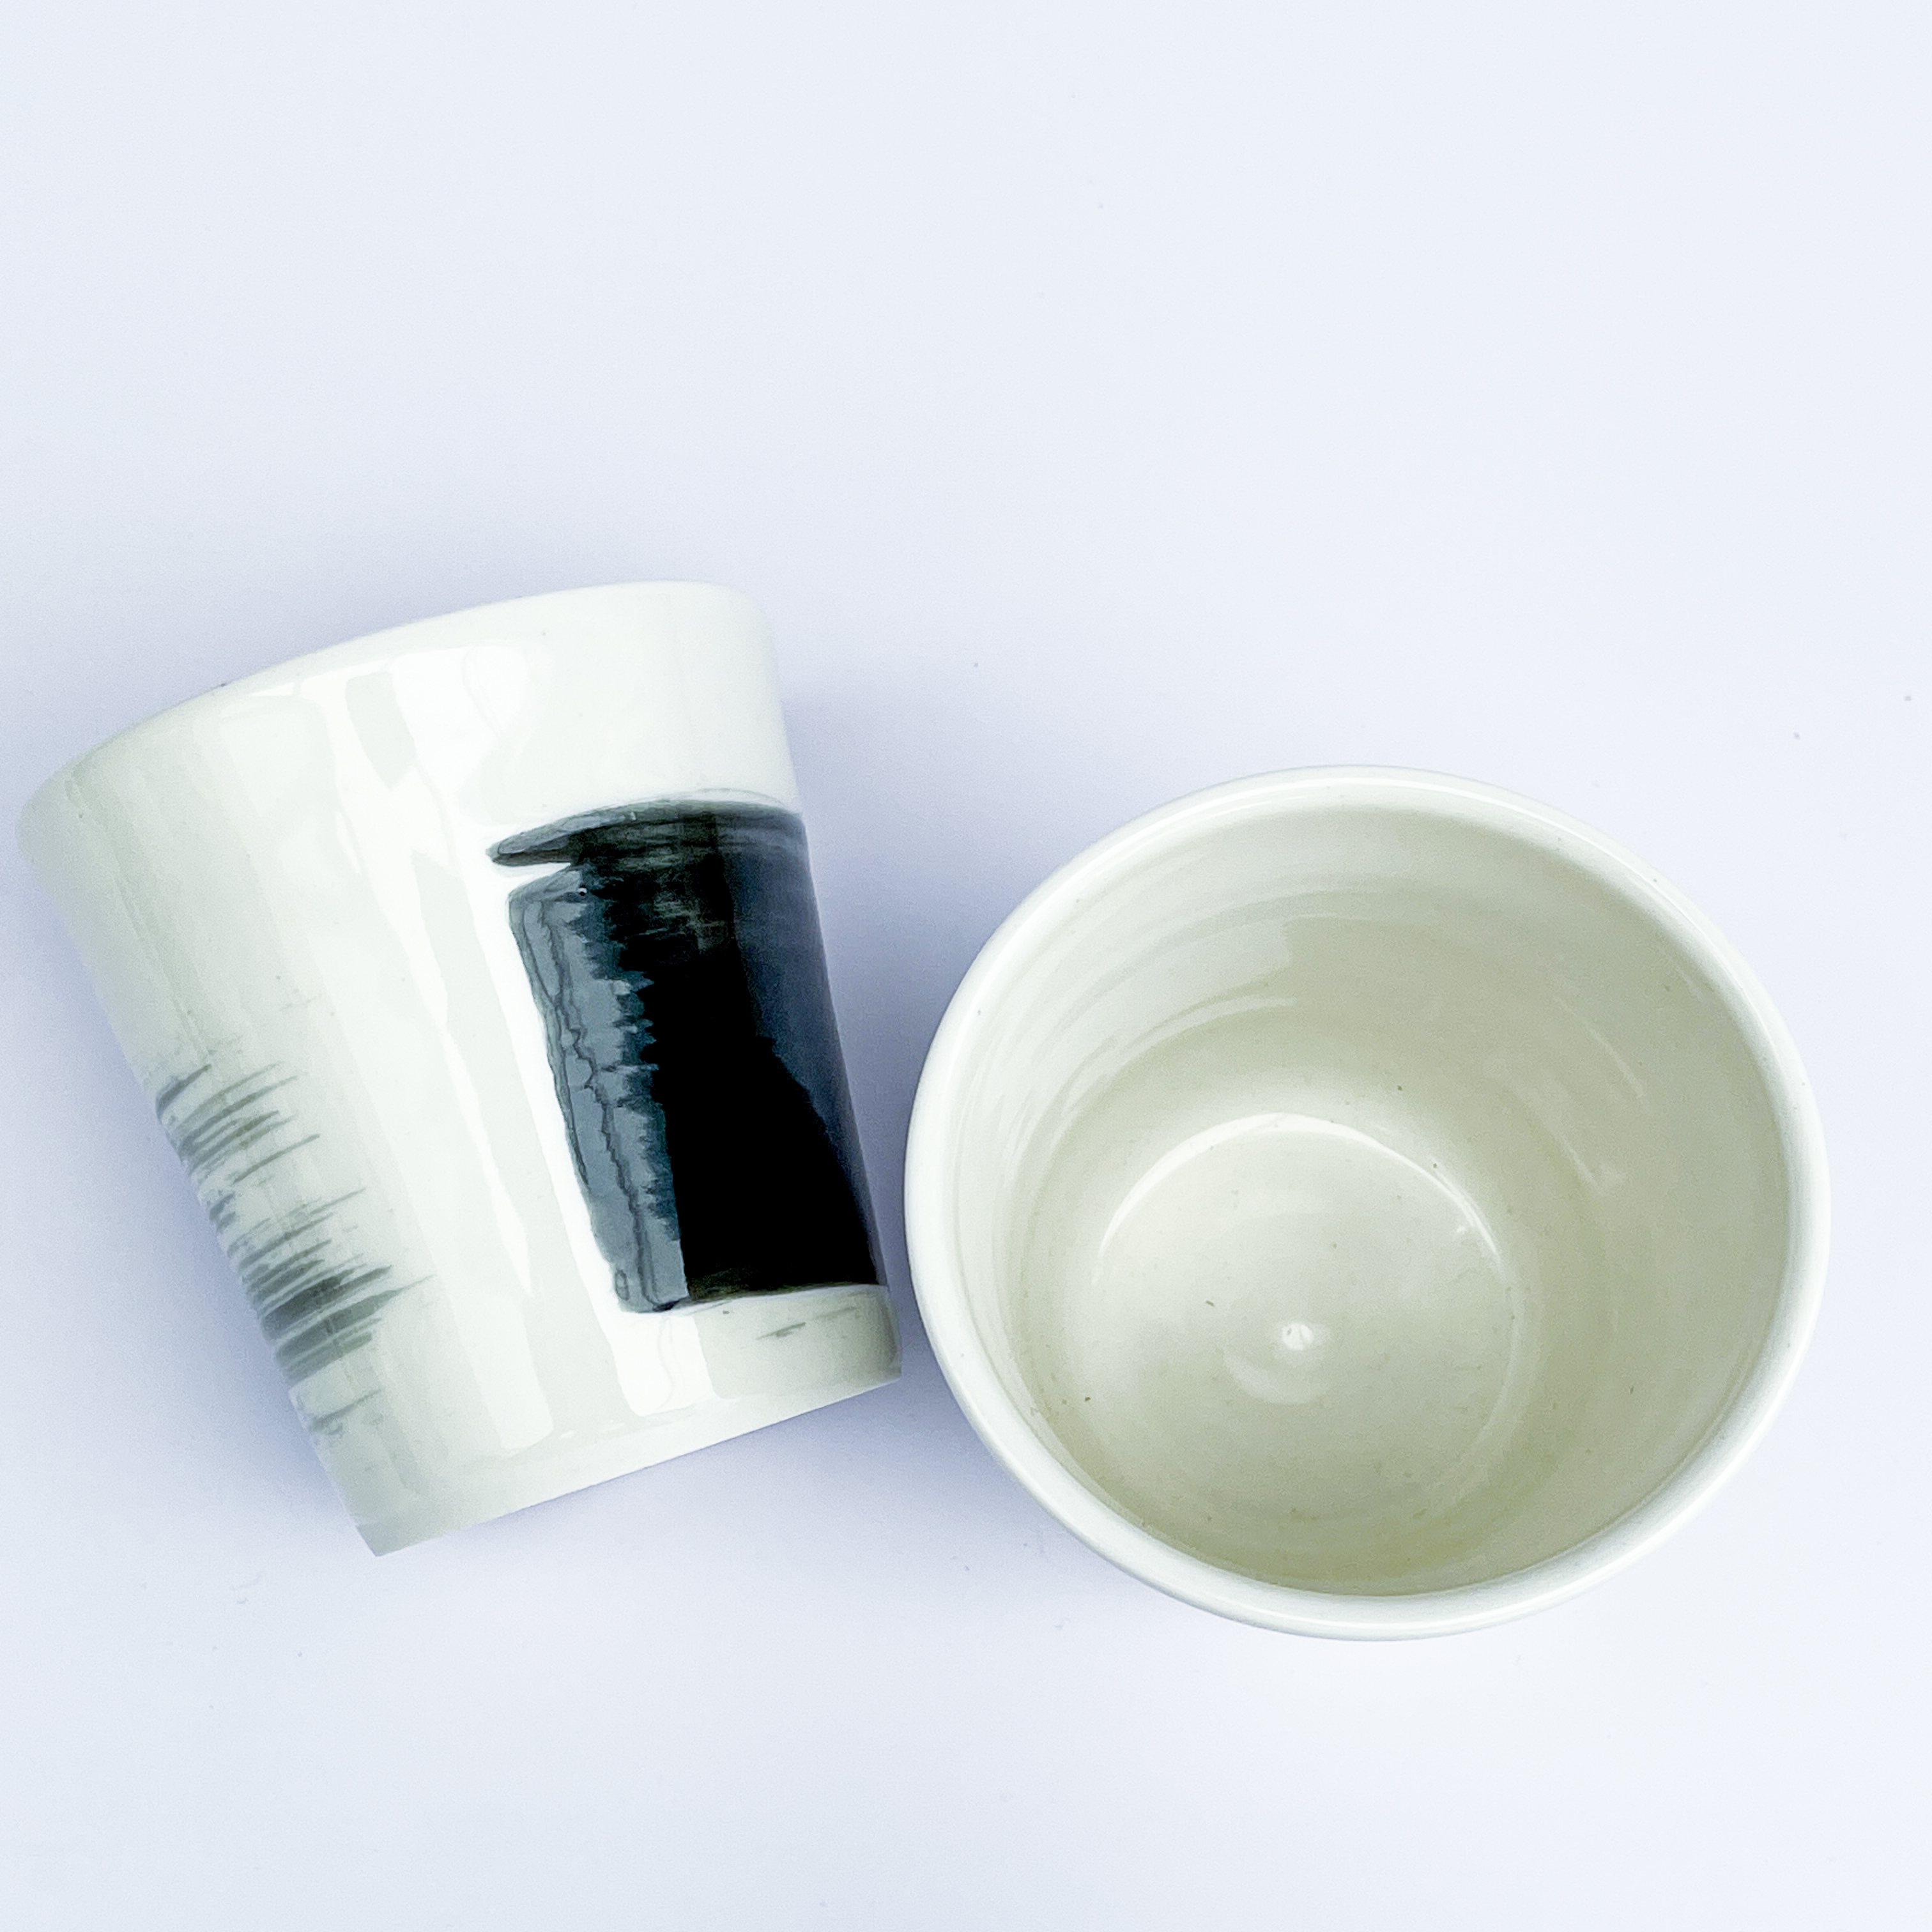 Two porcelain tumblers with black abstract decoration from above, one is lying on it's side